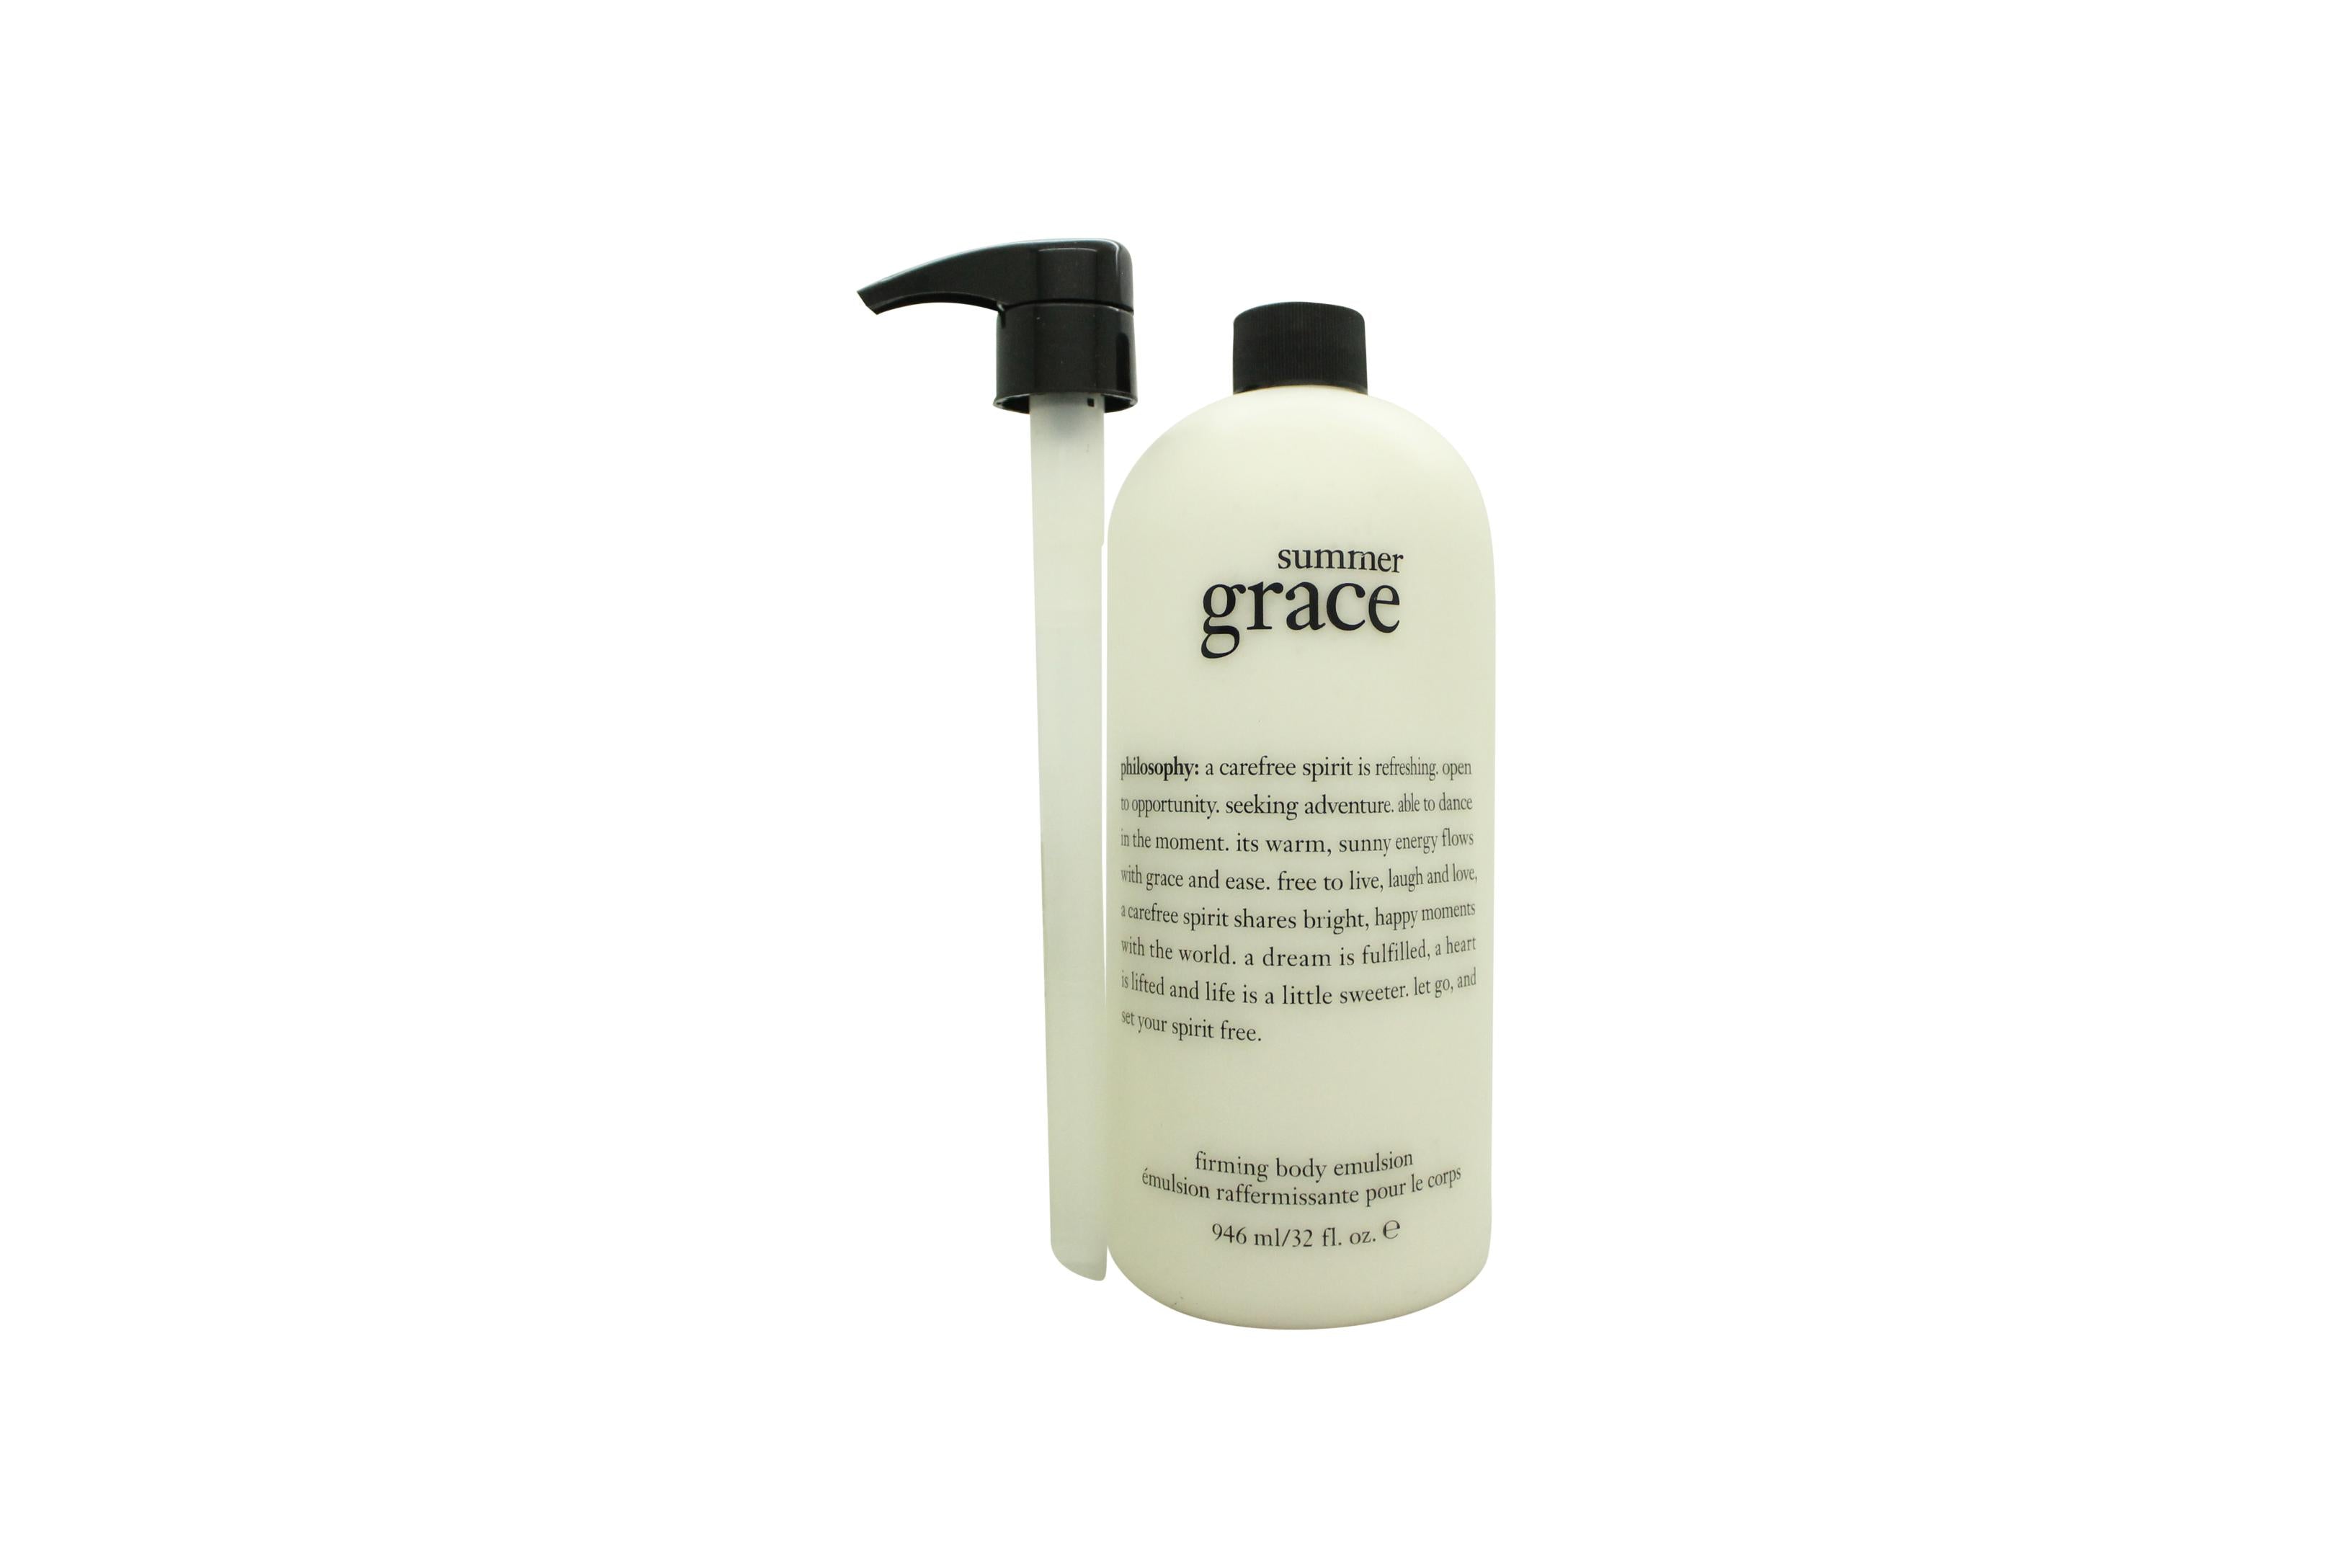 View Philosophy Summer Grace Firming Body Emulsion 946ml With Pump information